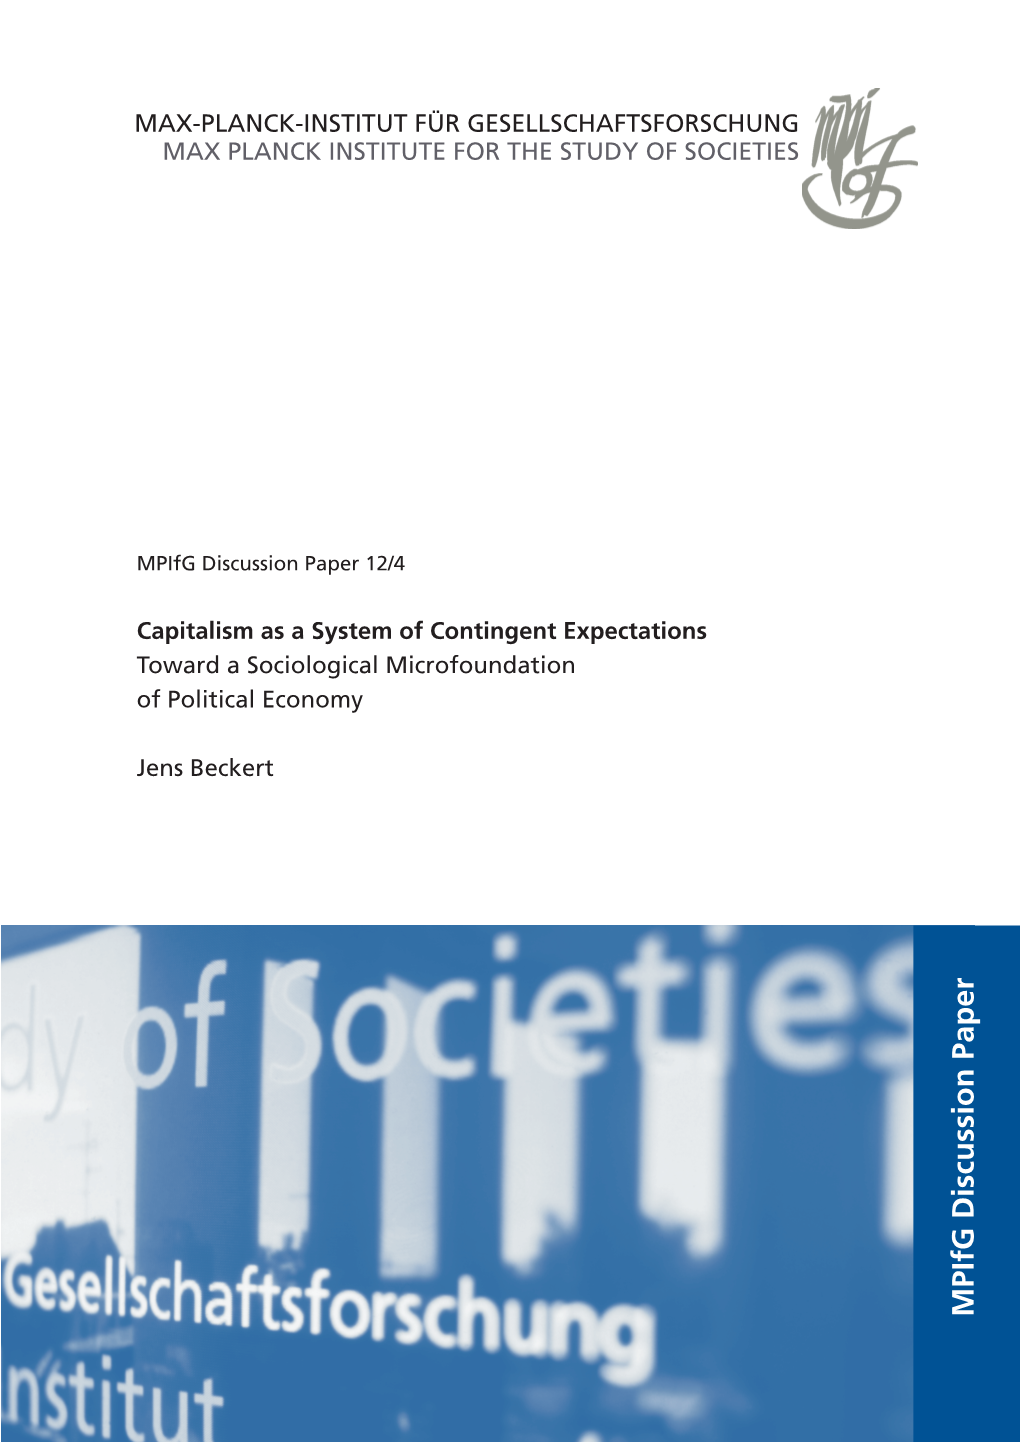 Capitalism As a System of Contingent Expectations: Toward a Sociological Microfoundation of Political Economy